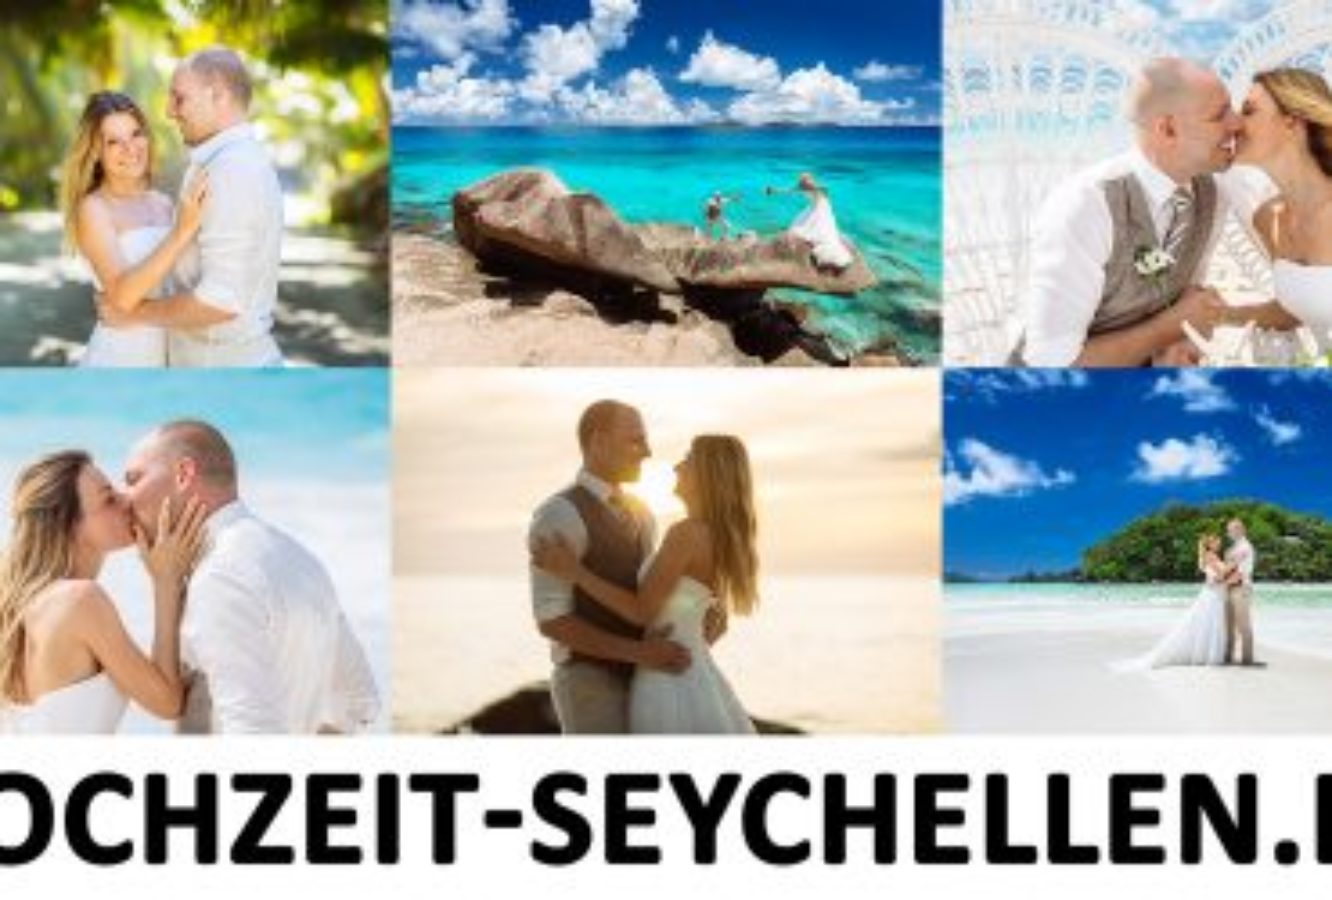 wedding seychelles review of the year 2015 31